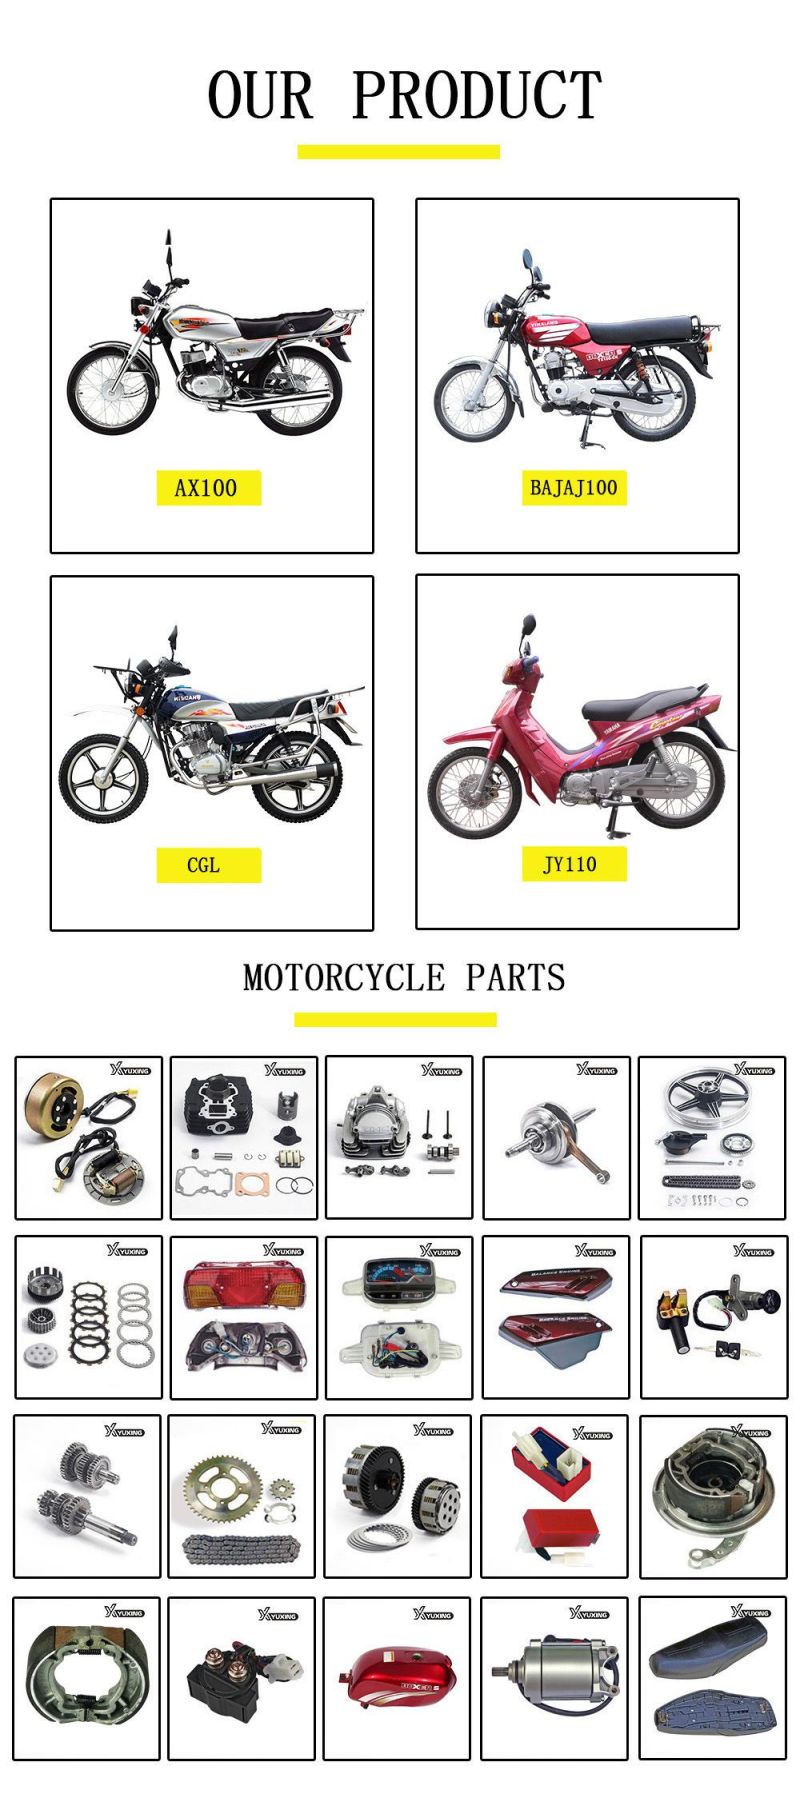 Yuxing Motorcycle Spare Parts Maintenance-Free 12n9-BS 12V9ah Motorcycle Battery for Motorbike